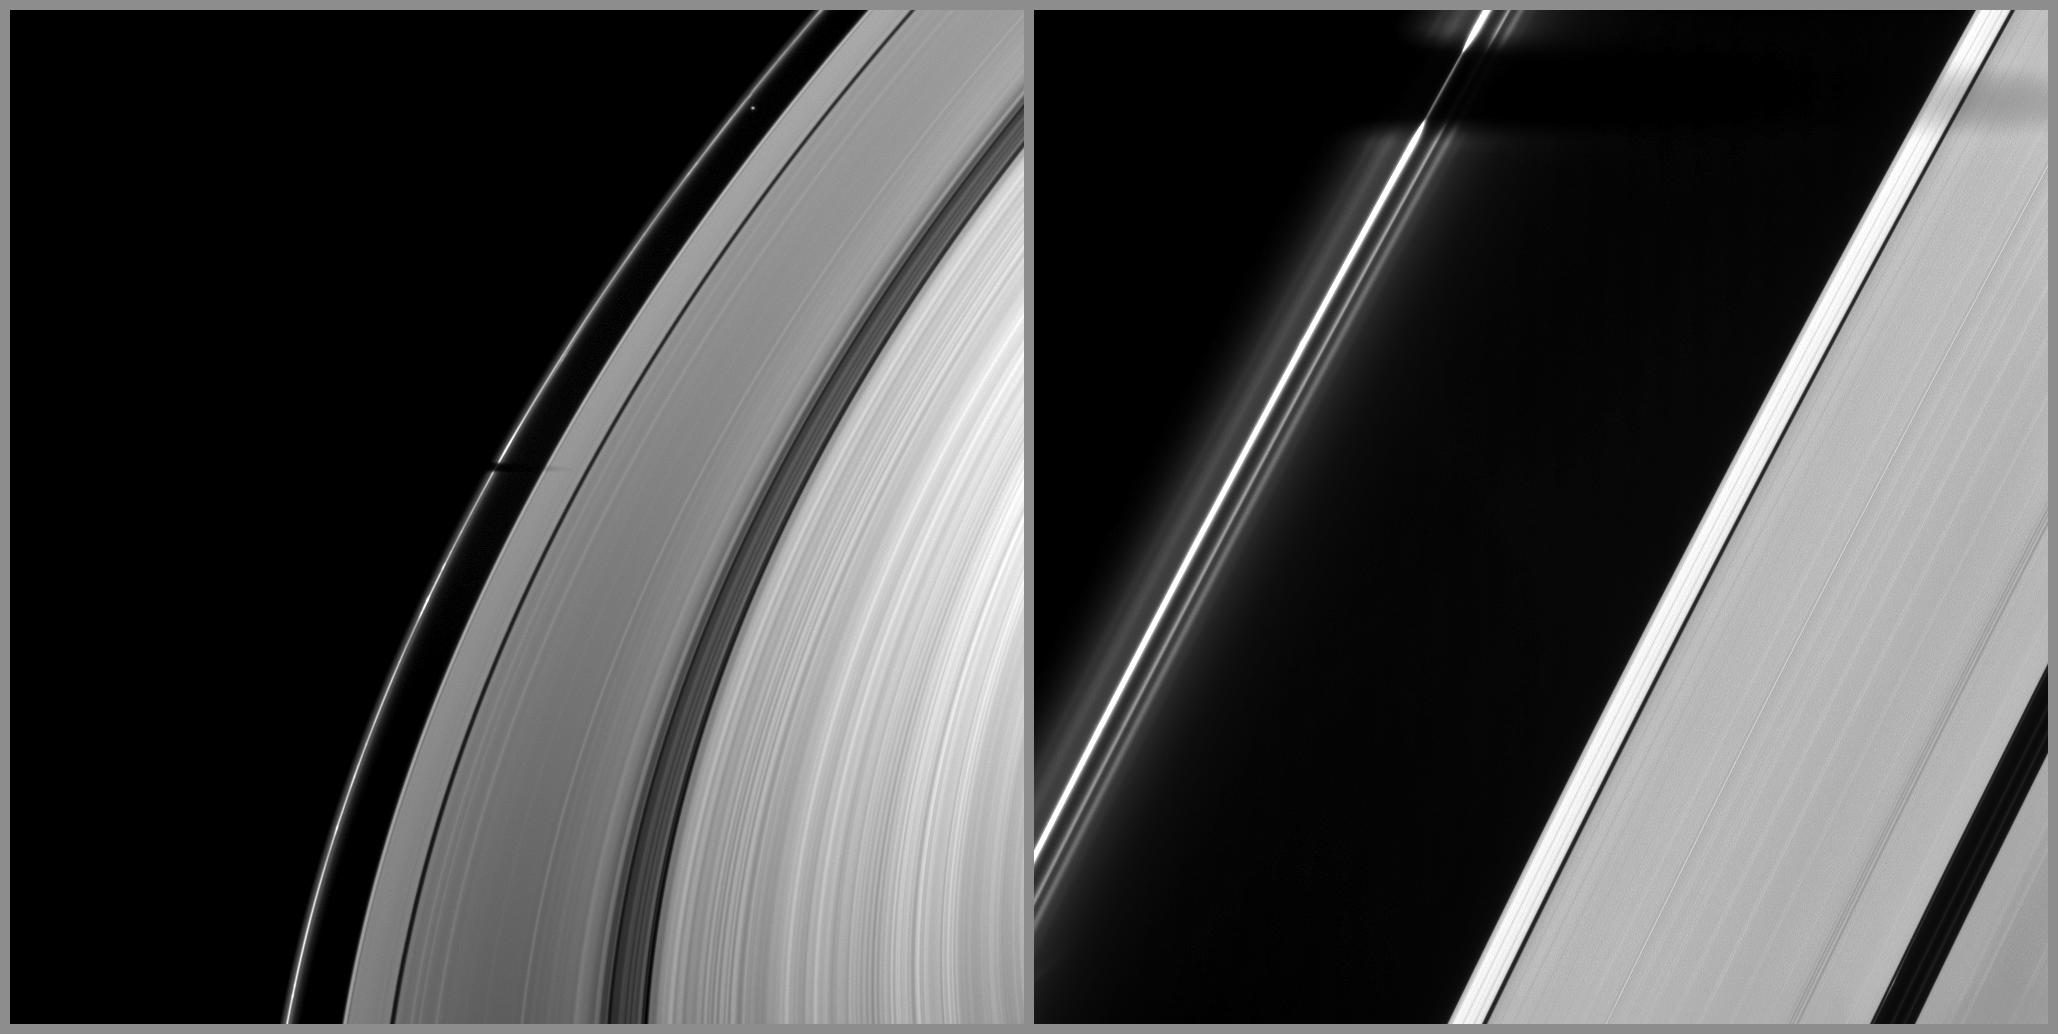 Tethys casts its shadow across Saturn's F ring and part of the A ring